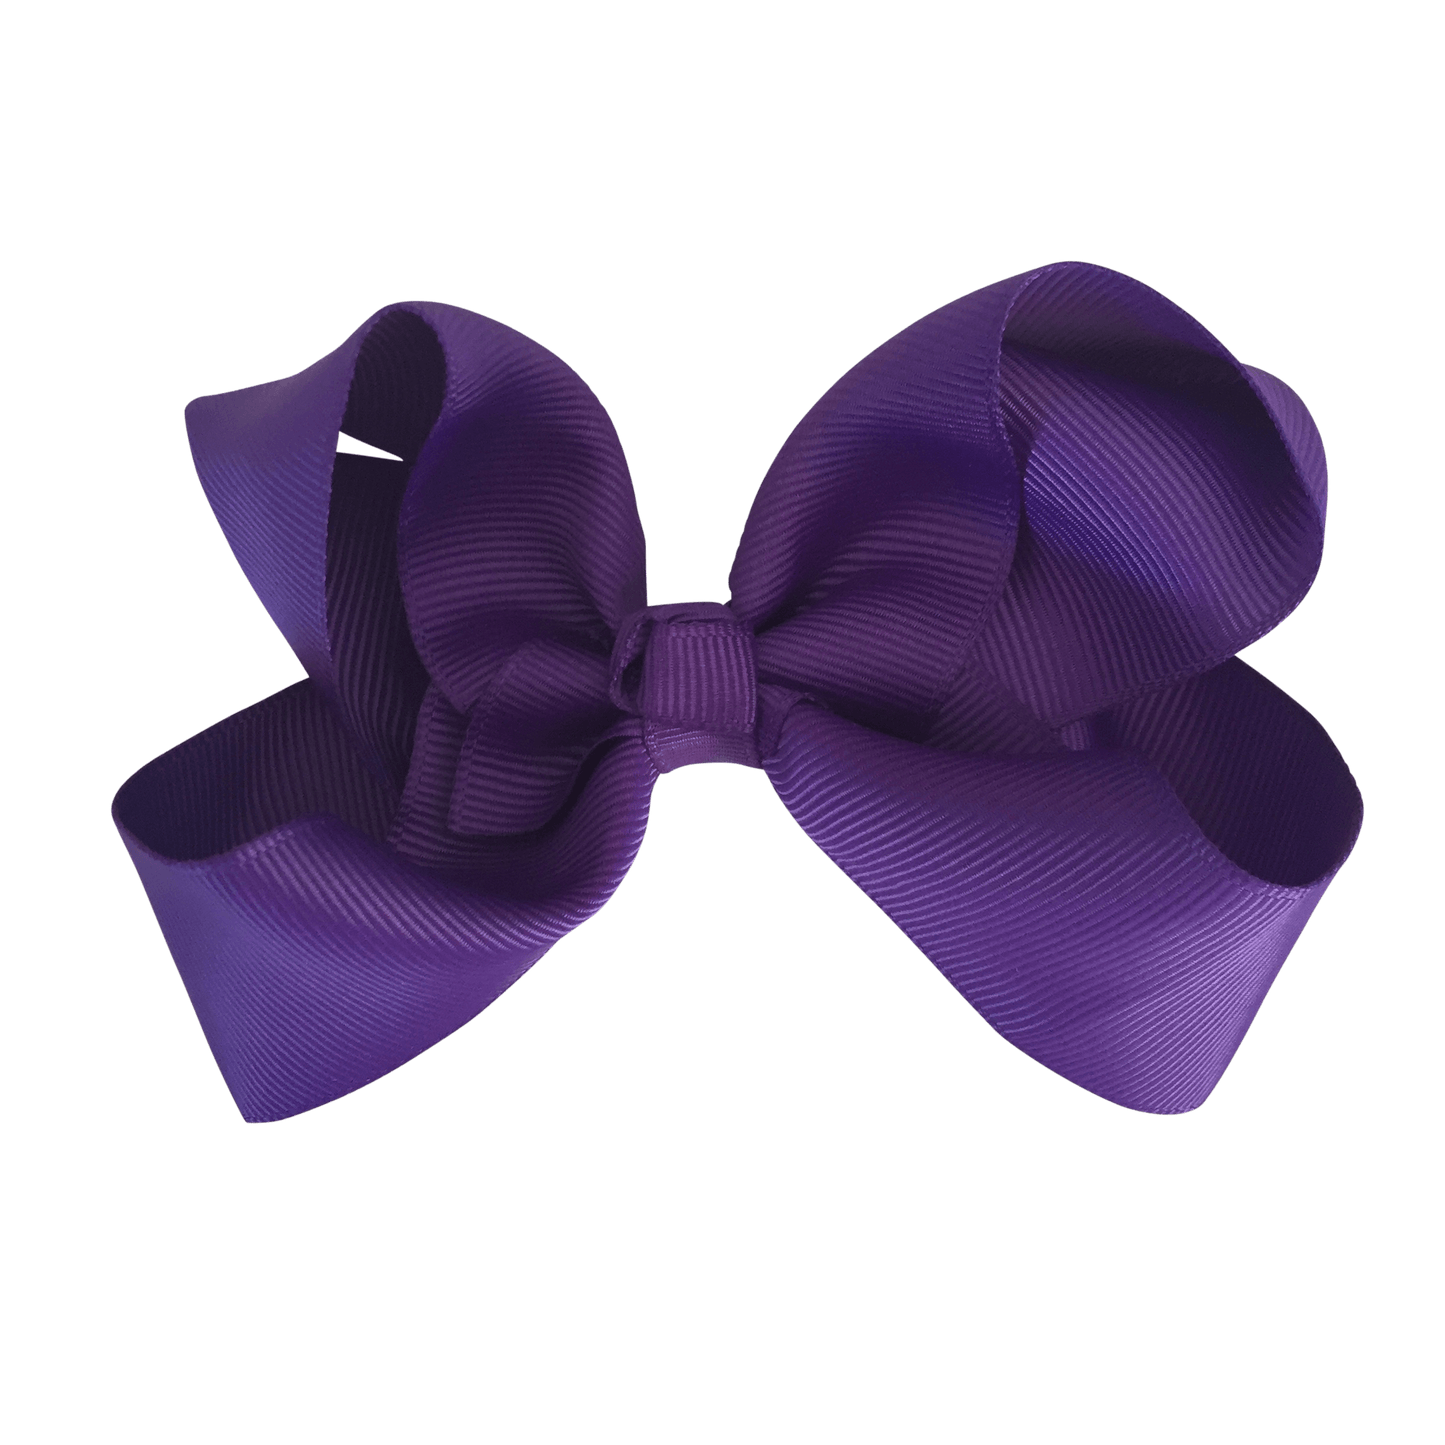 Best Friends / BFF Bow - Hair clips - School Uniform Hair Accessories - Ponytails and Fairytales